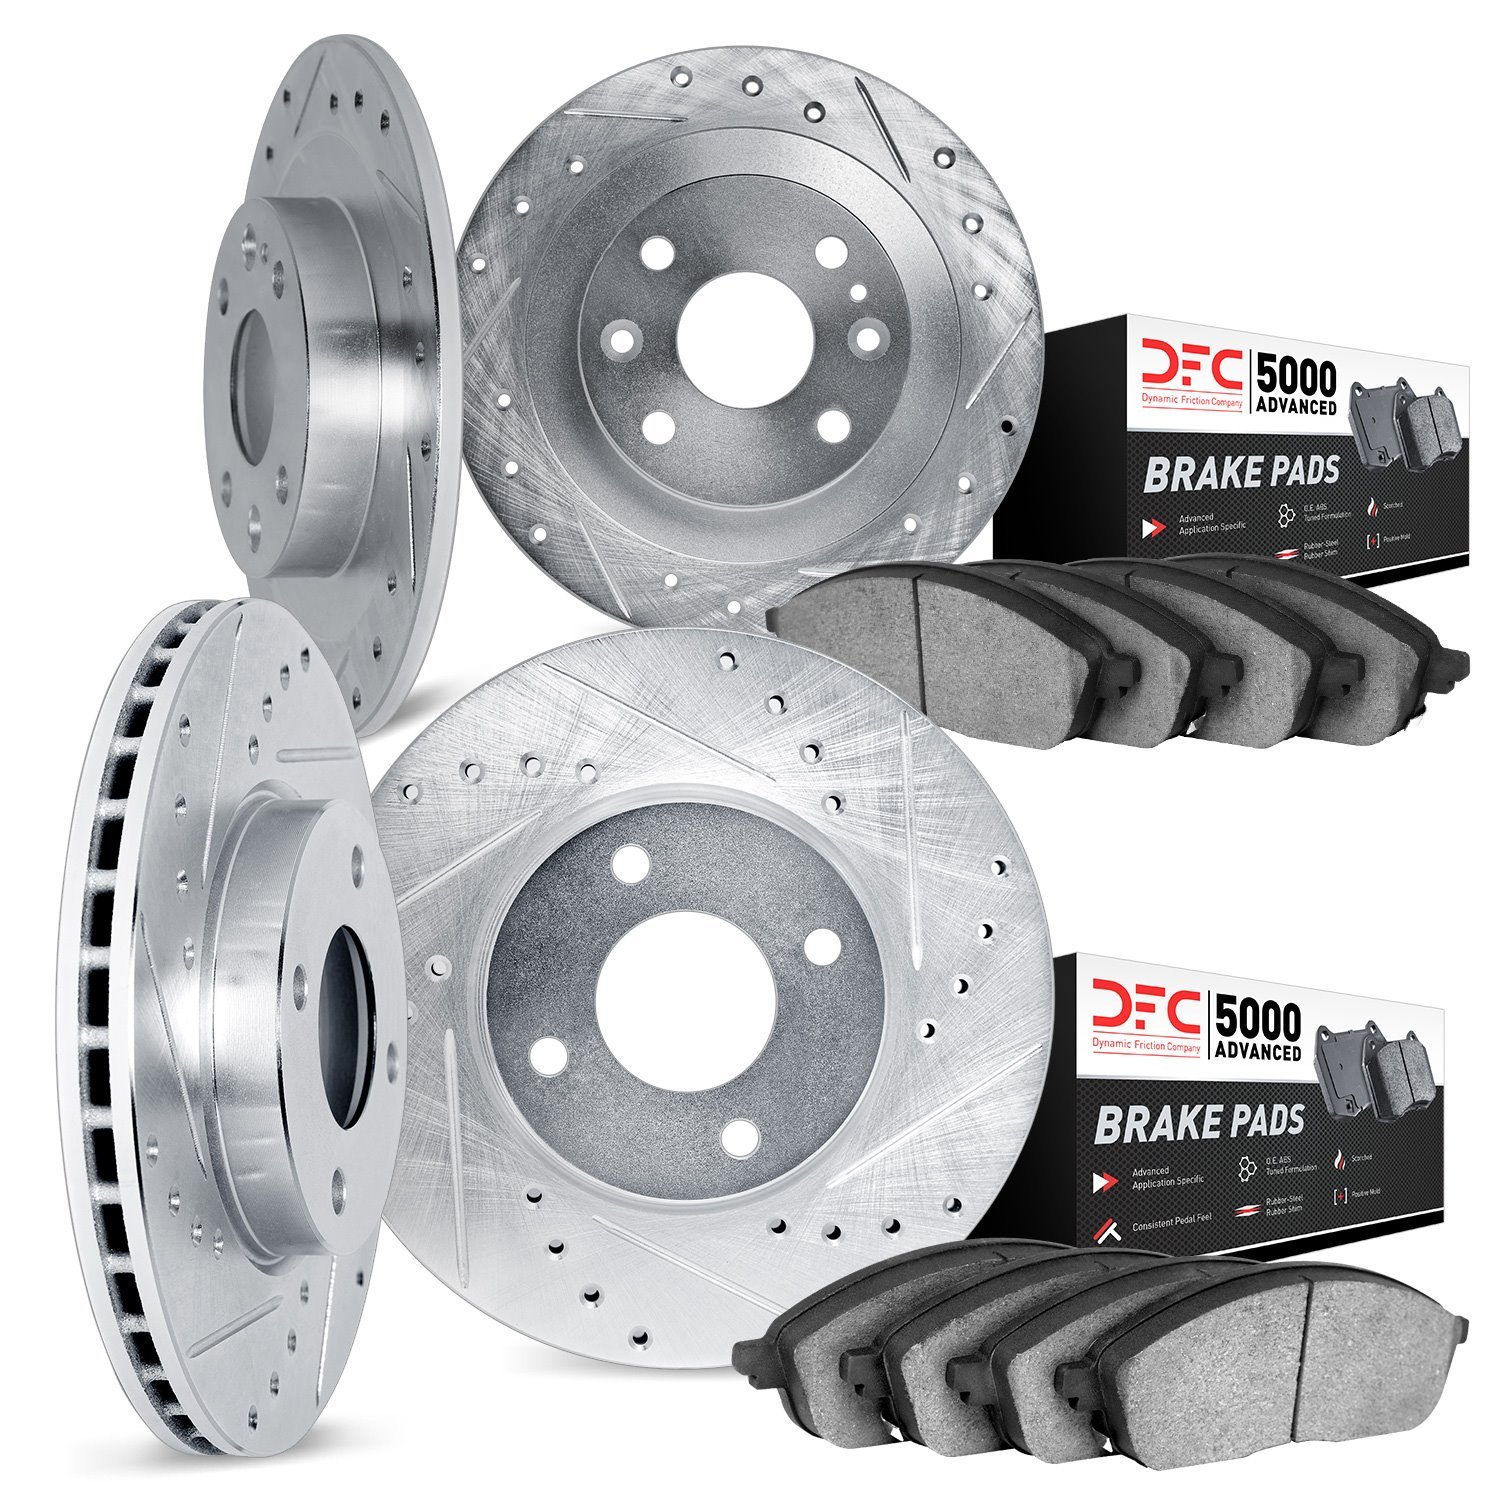 7504-60000 Drilled/Slotted Brake Rotors w/5000 Advanced Brake Pads Kit [Silver], 1987-1991 Sterling, Position: Front and Rear